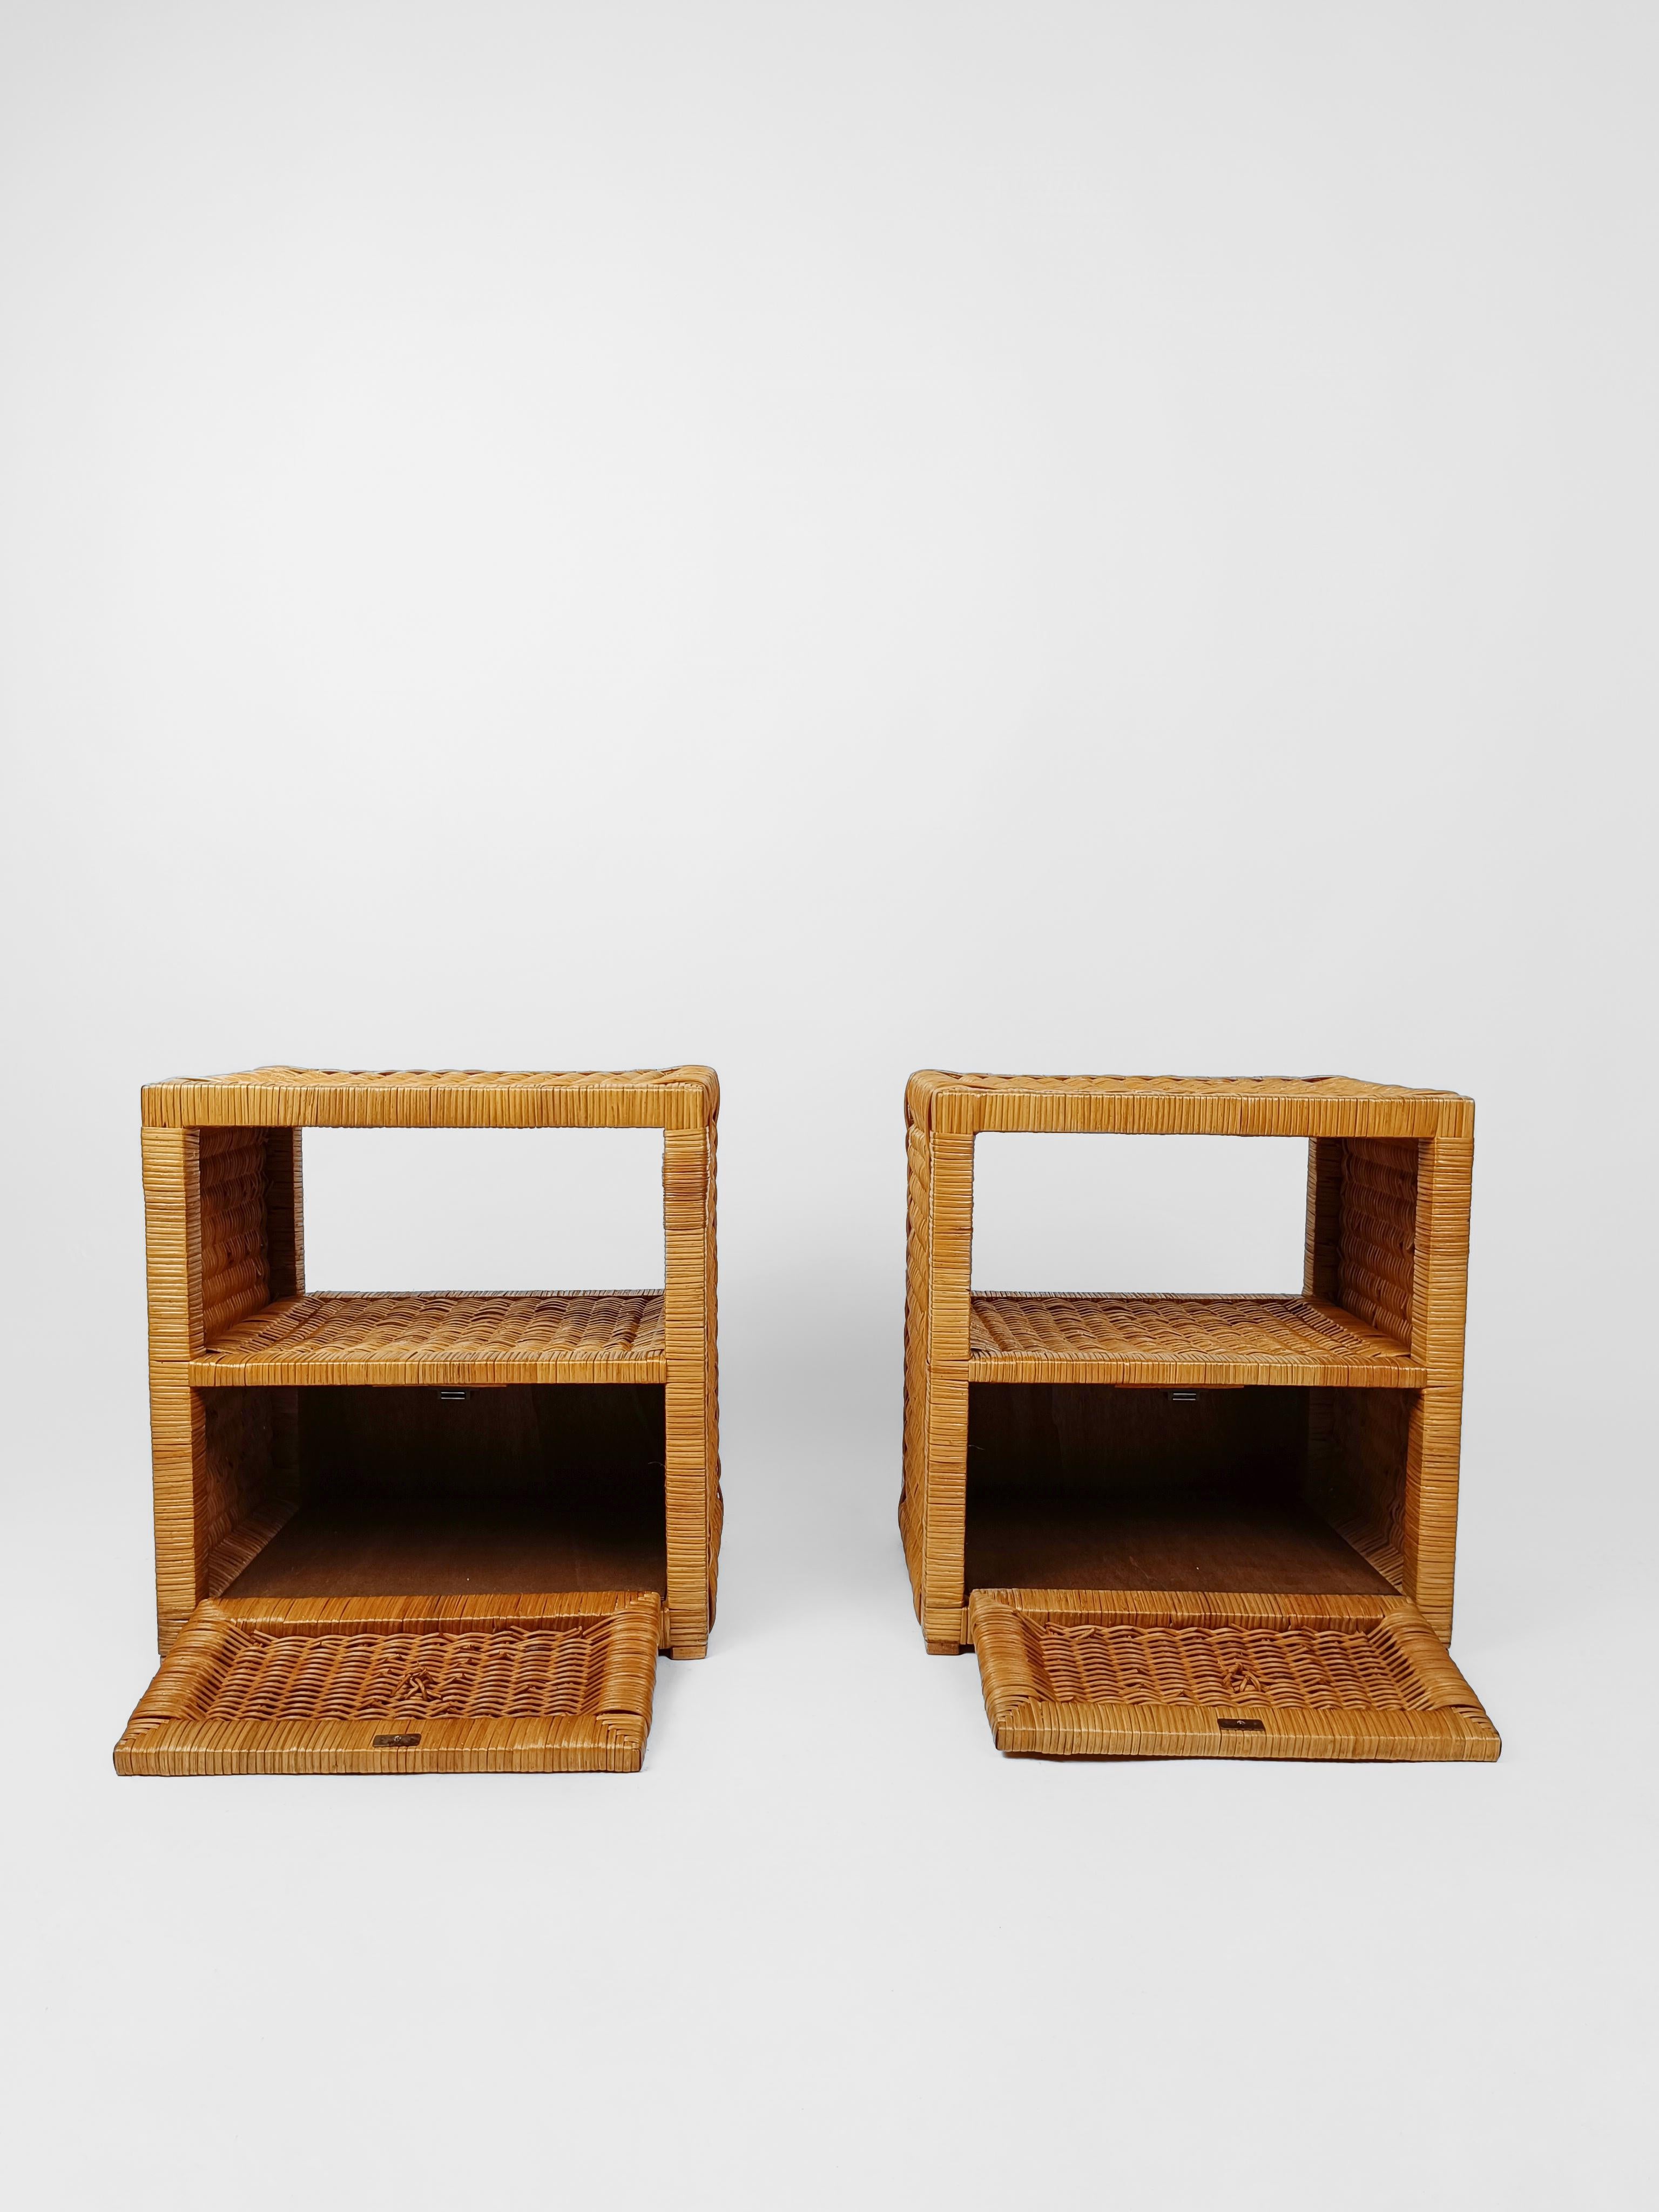 Pair of Woven Rattan and Wicker Nightstands / Bedside Tables, Italy 1970s 1